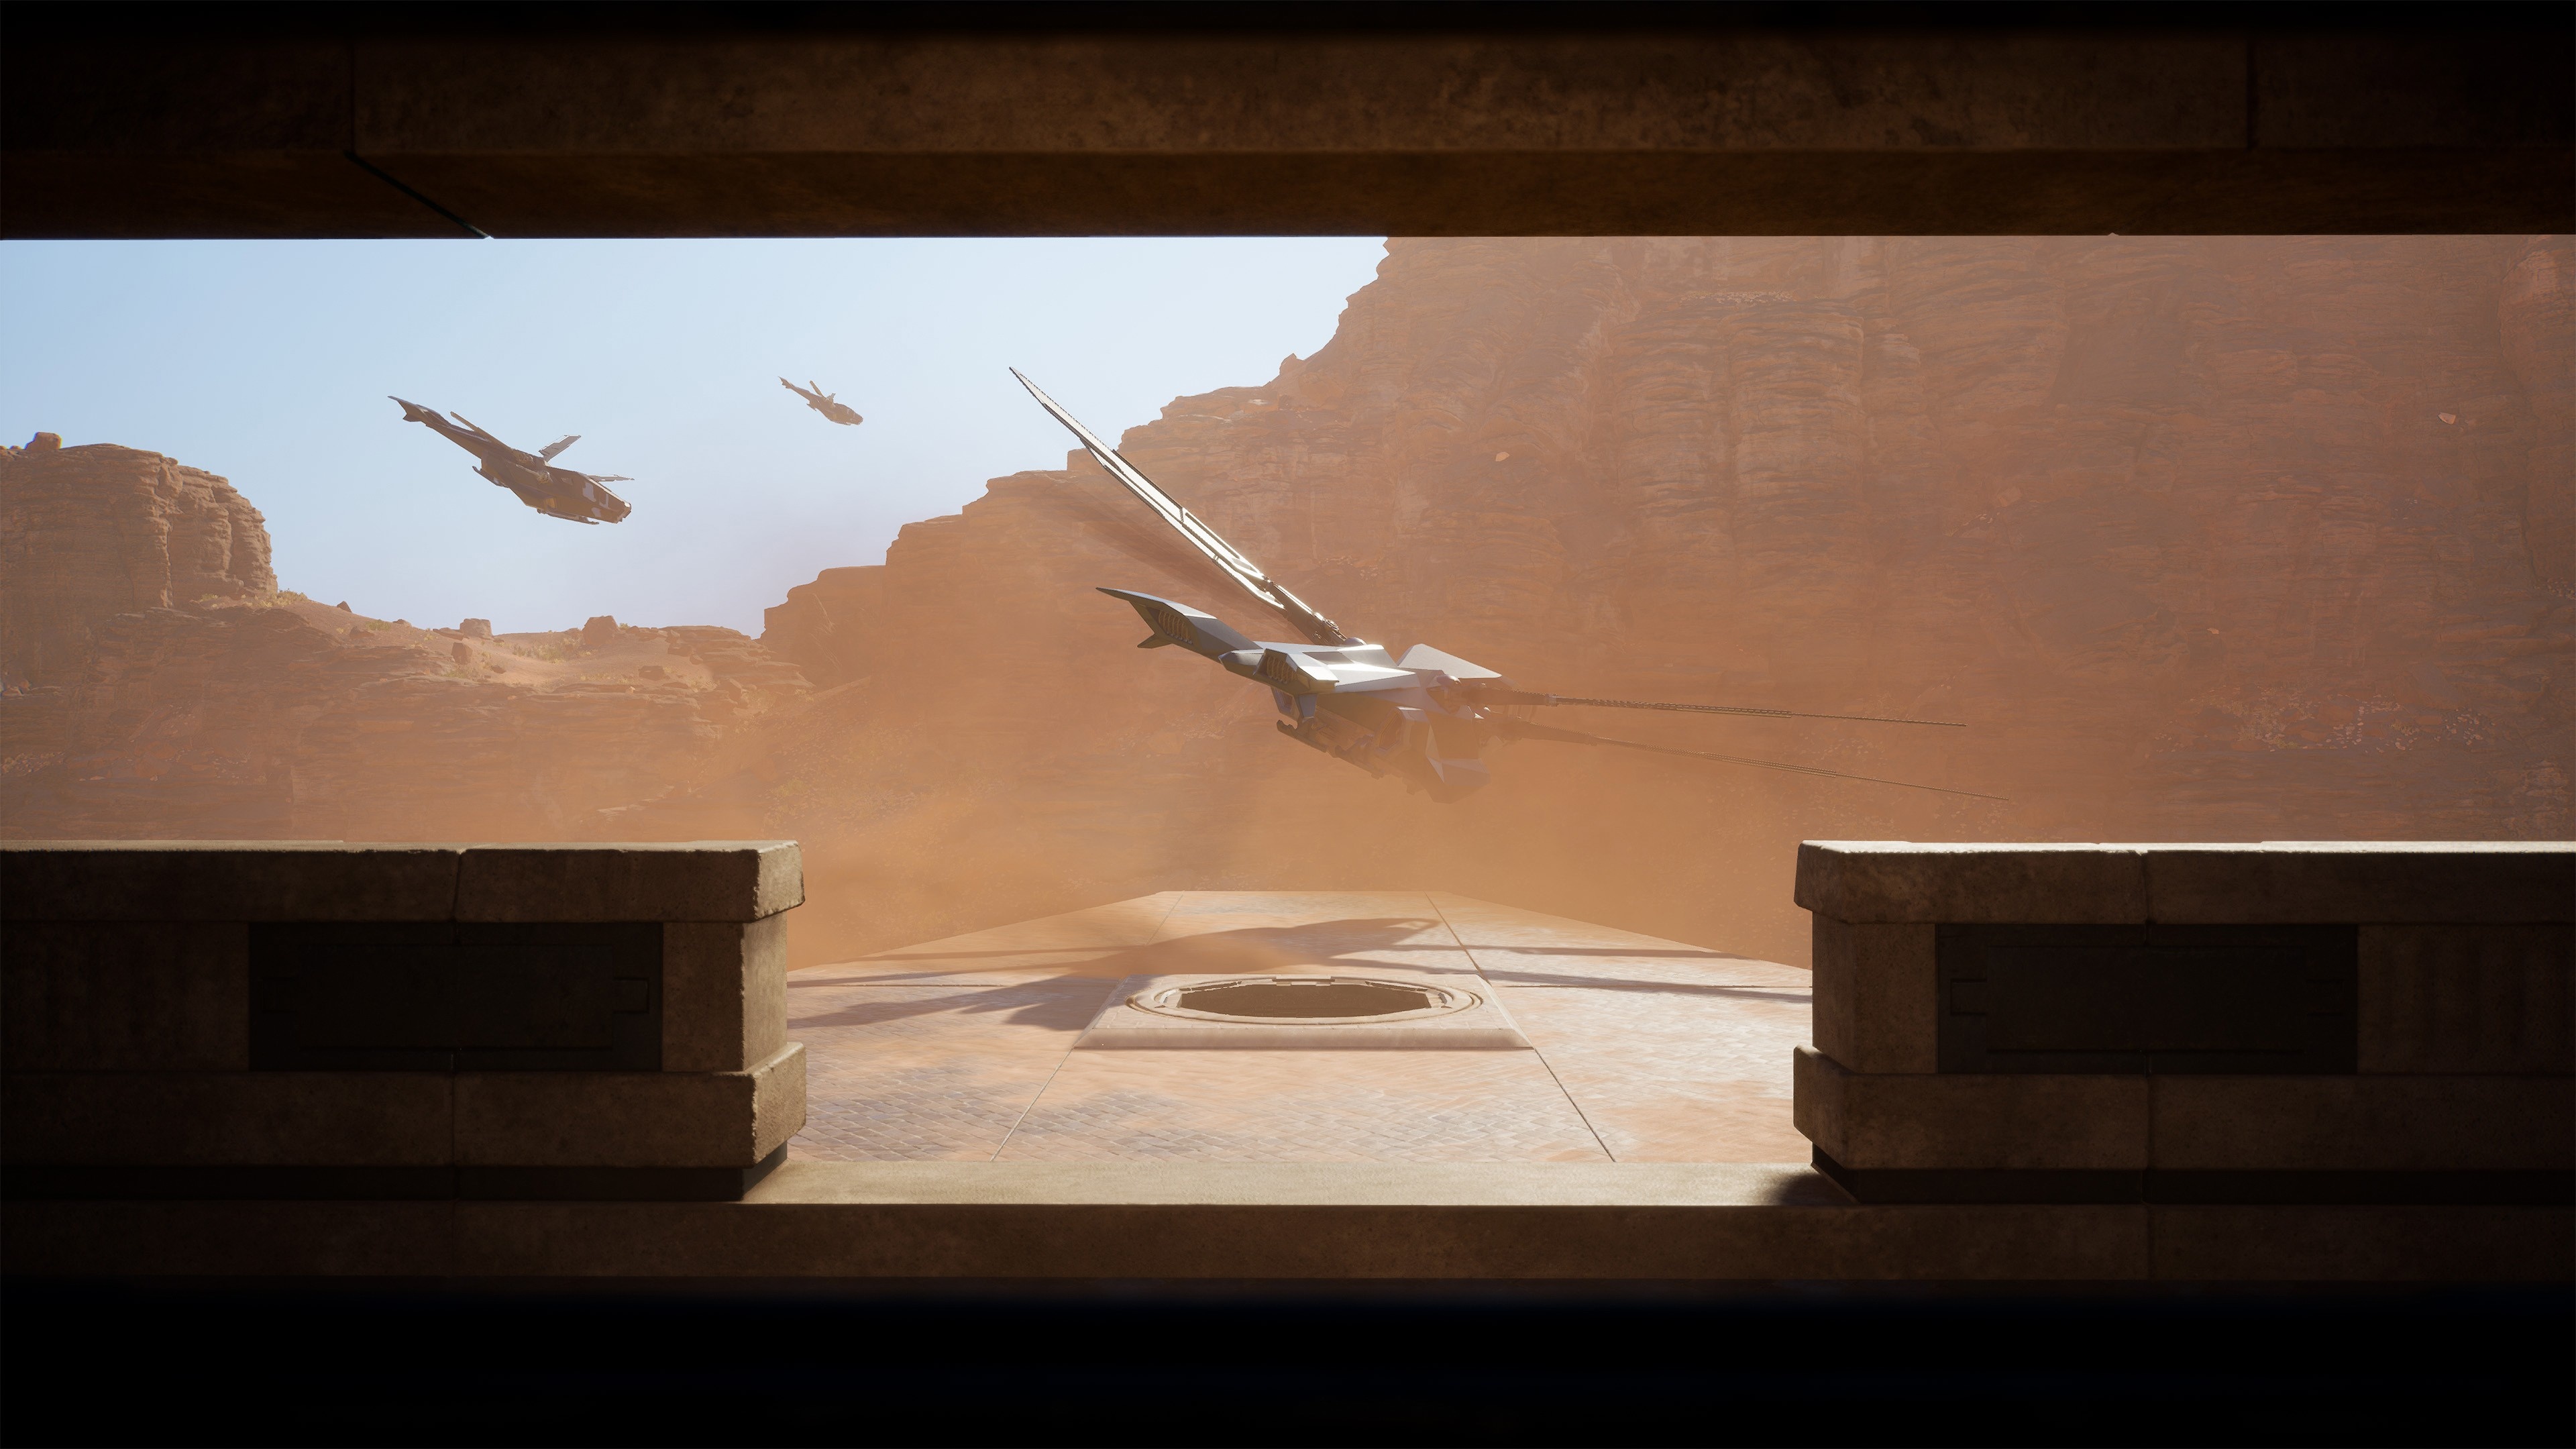 (Flying works, riding doesn''t: The new Dune game does not have all features at release.)